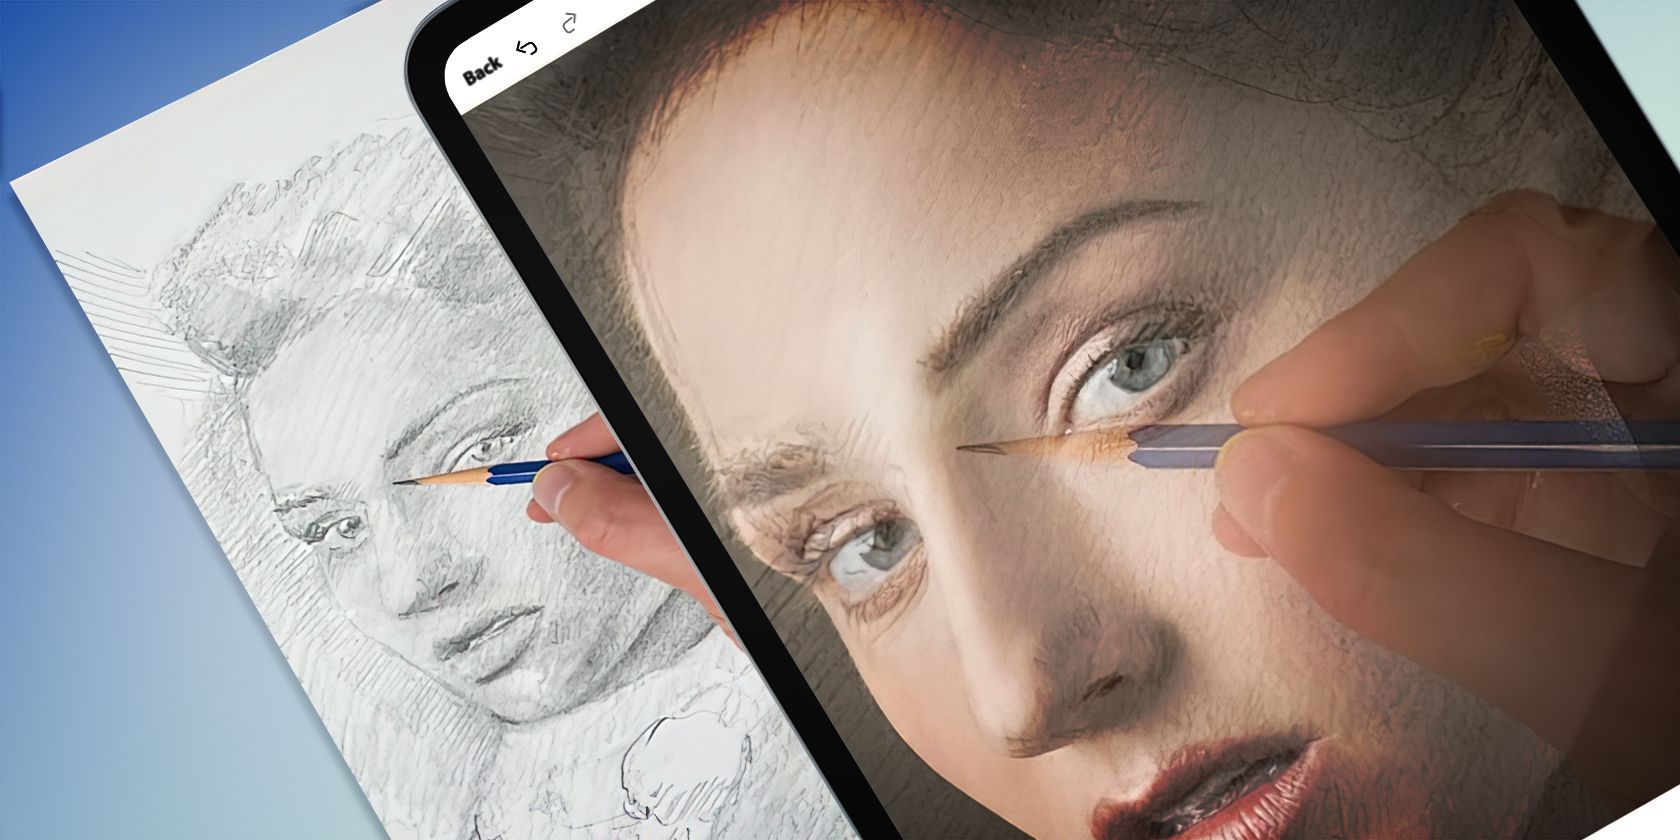 DaVinci Eye UI shown on a phone and a person drawing in the background